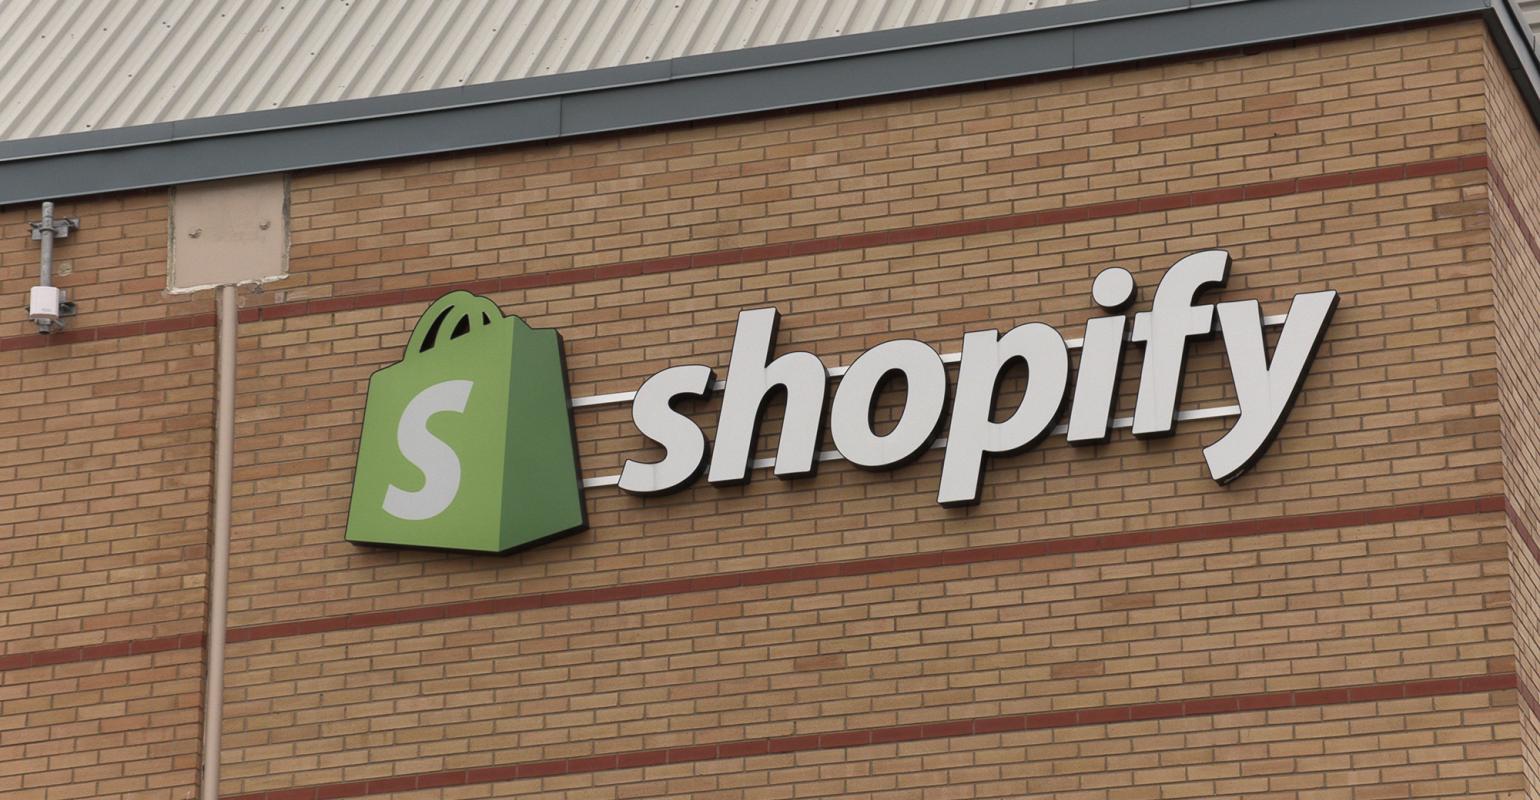 Shopify Gains After Deal With Walmart Expands Networkâs Reach | National Real Estate Investor